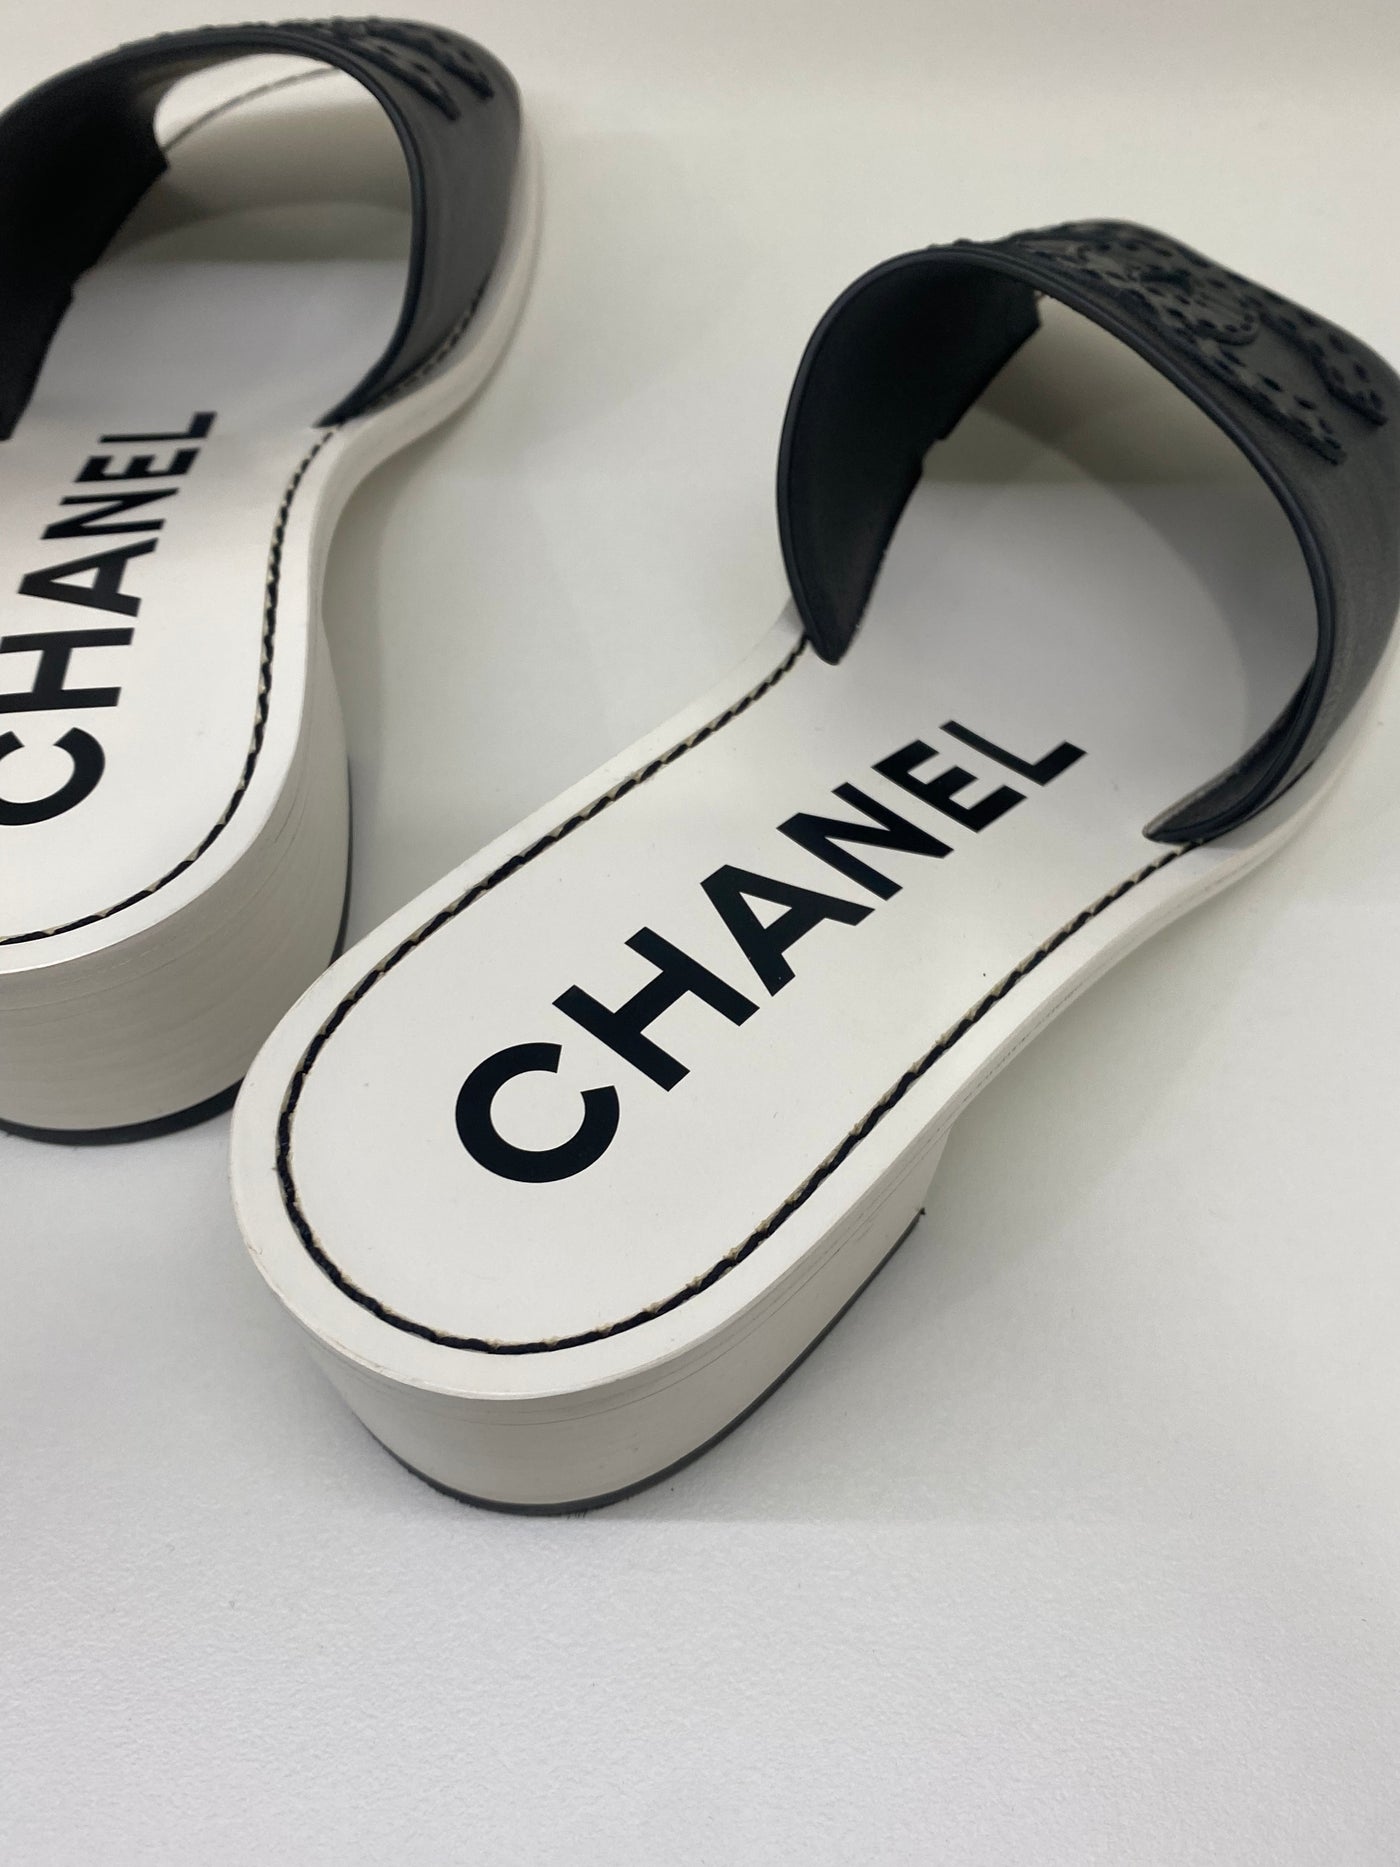 Chanel Black and White Mules37.5